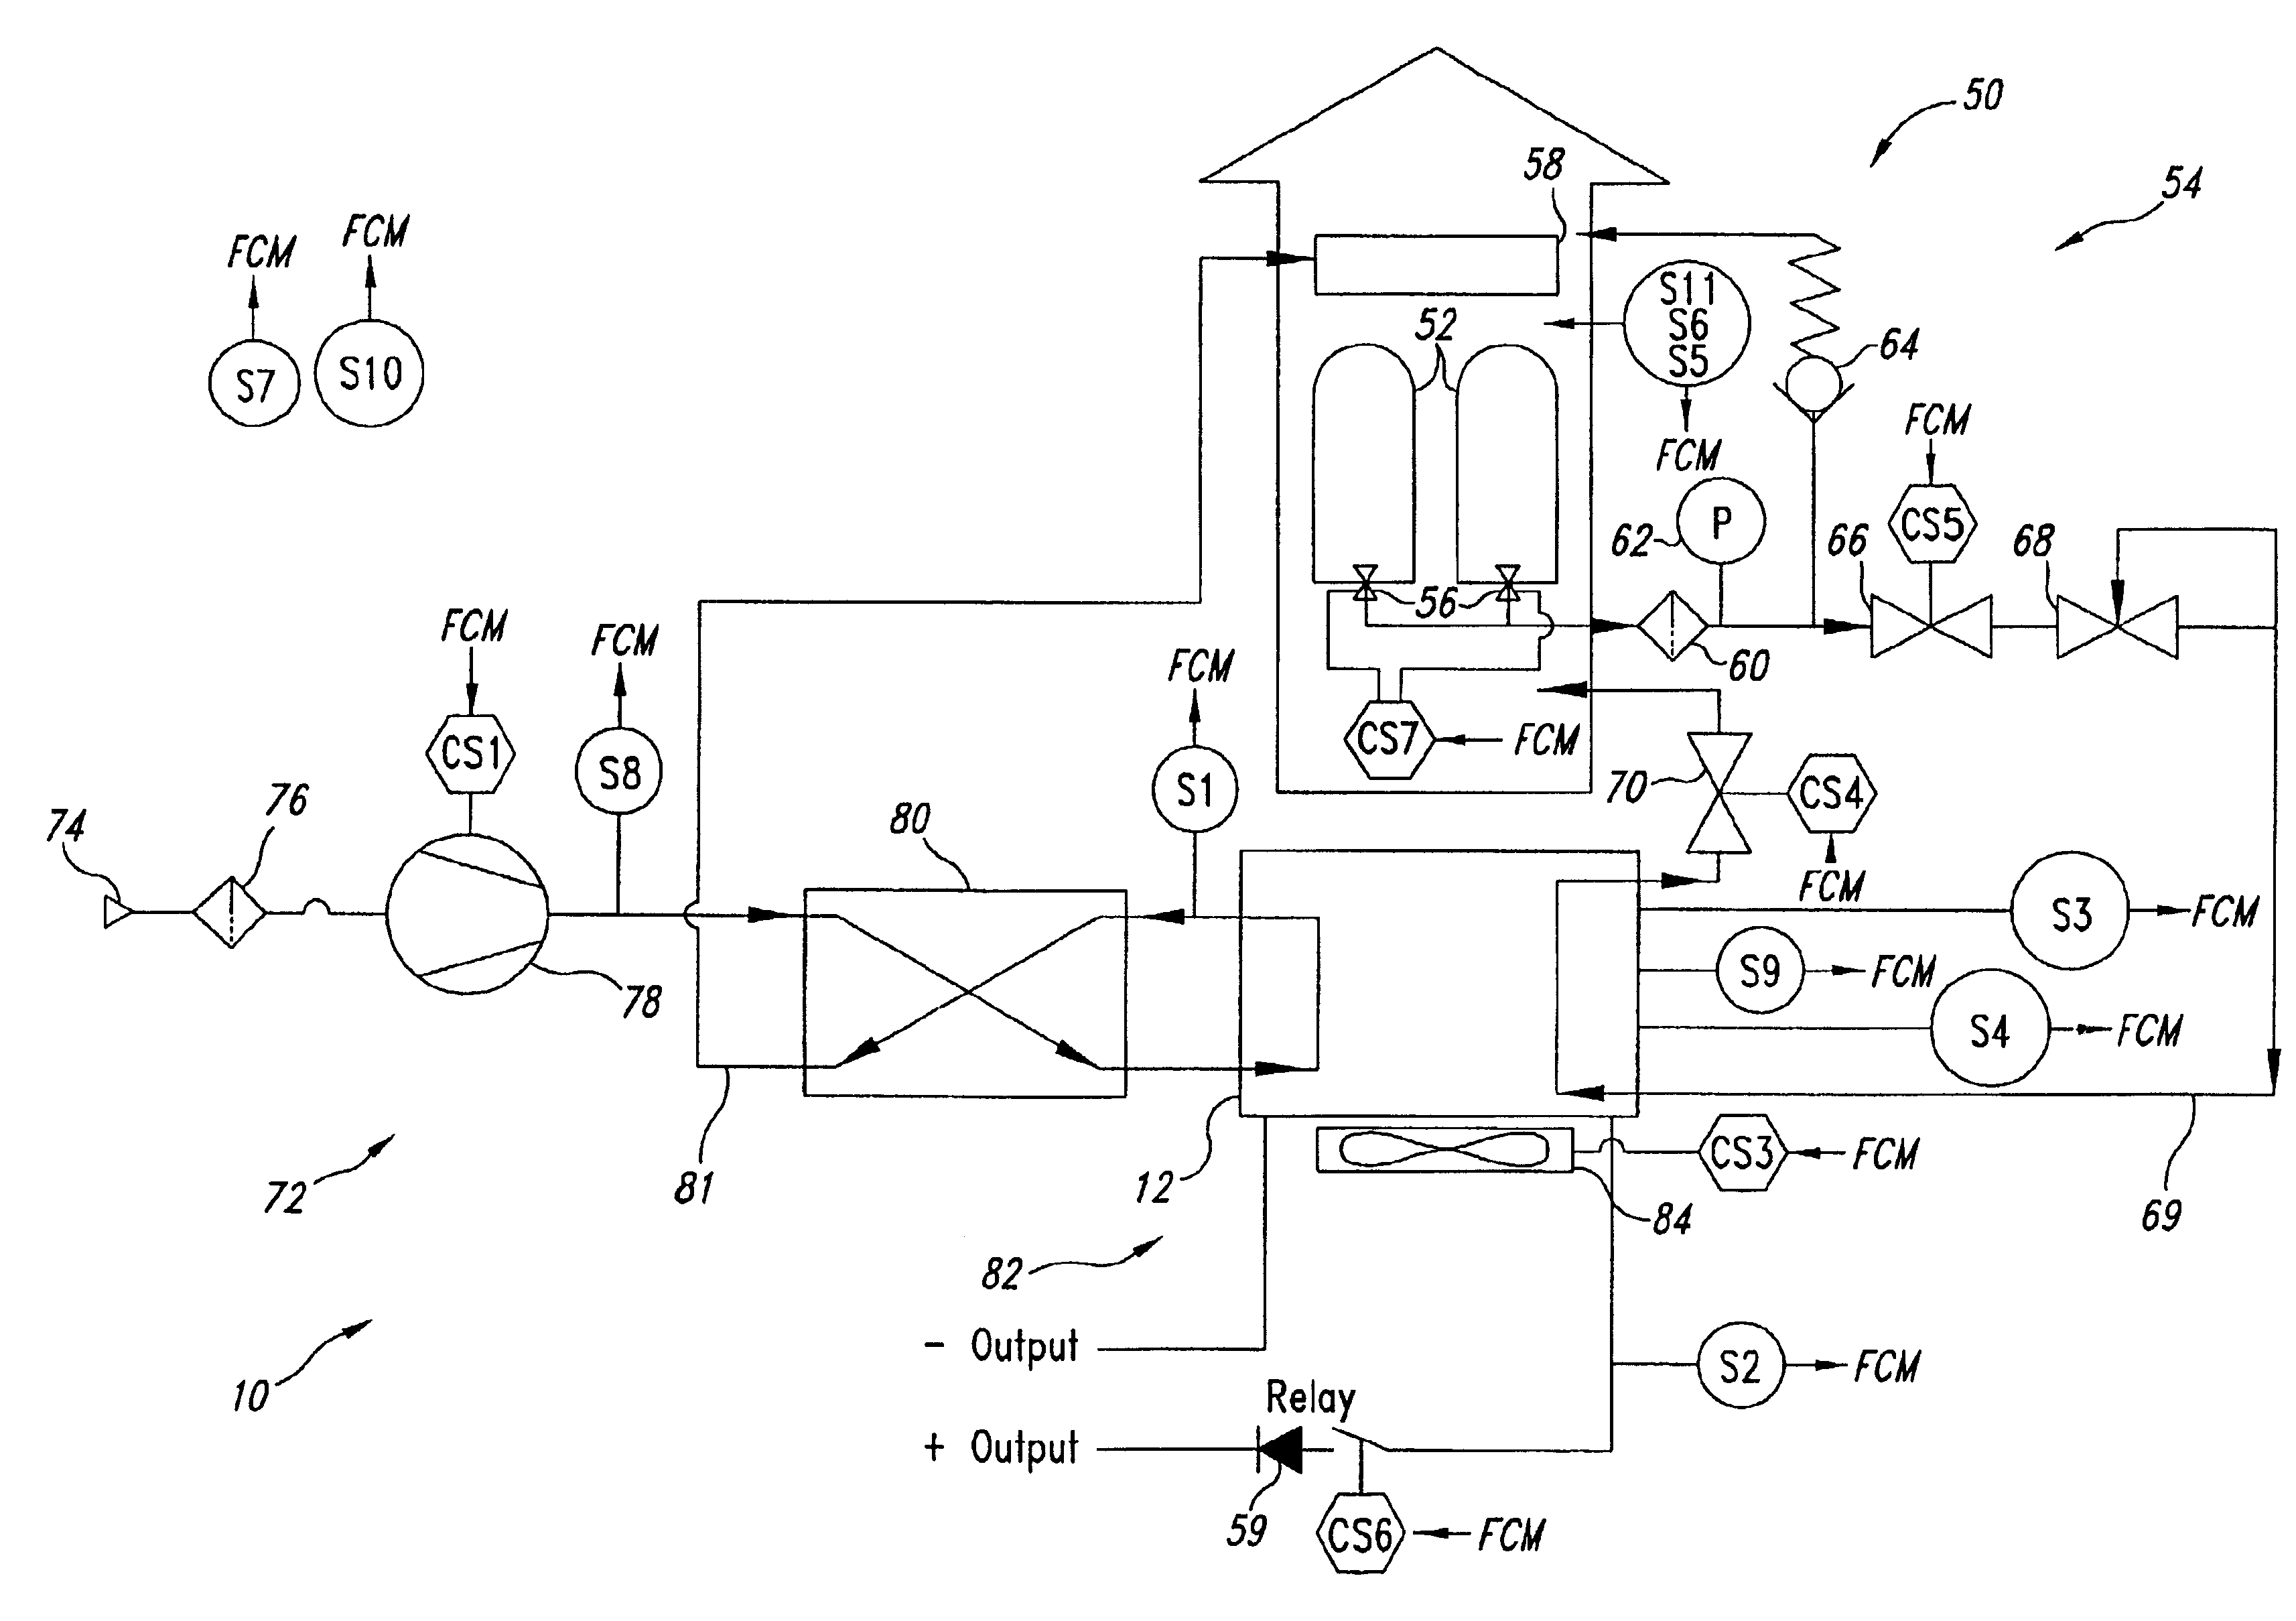 Fuel cell resuscitation method and apparatus